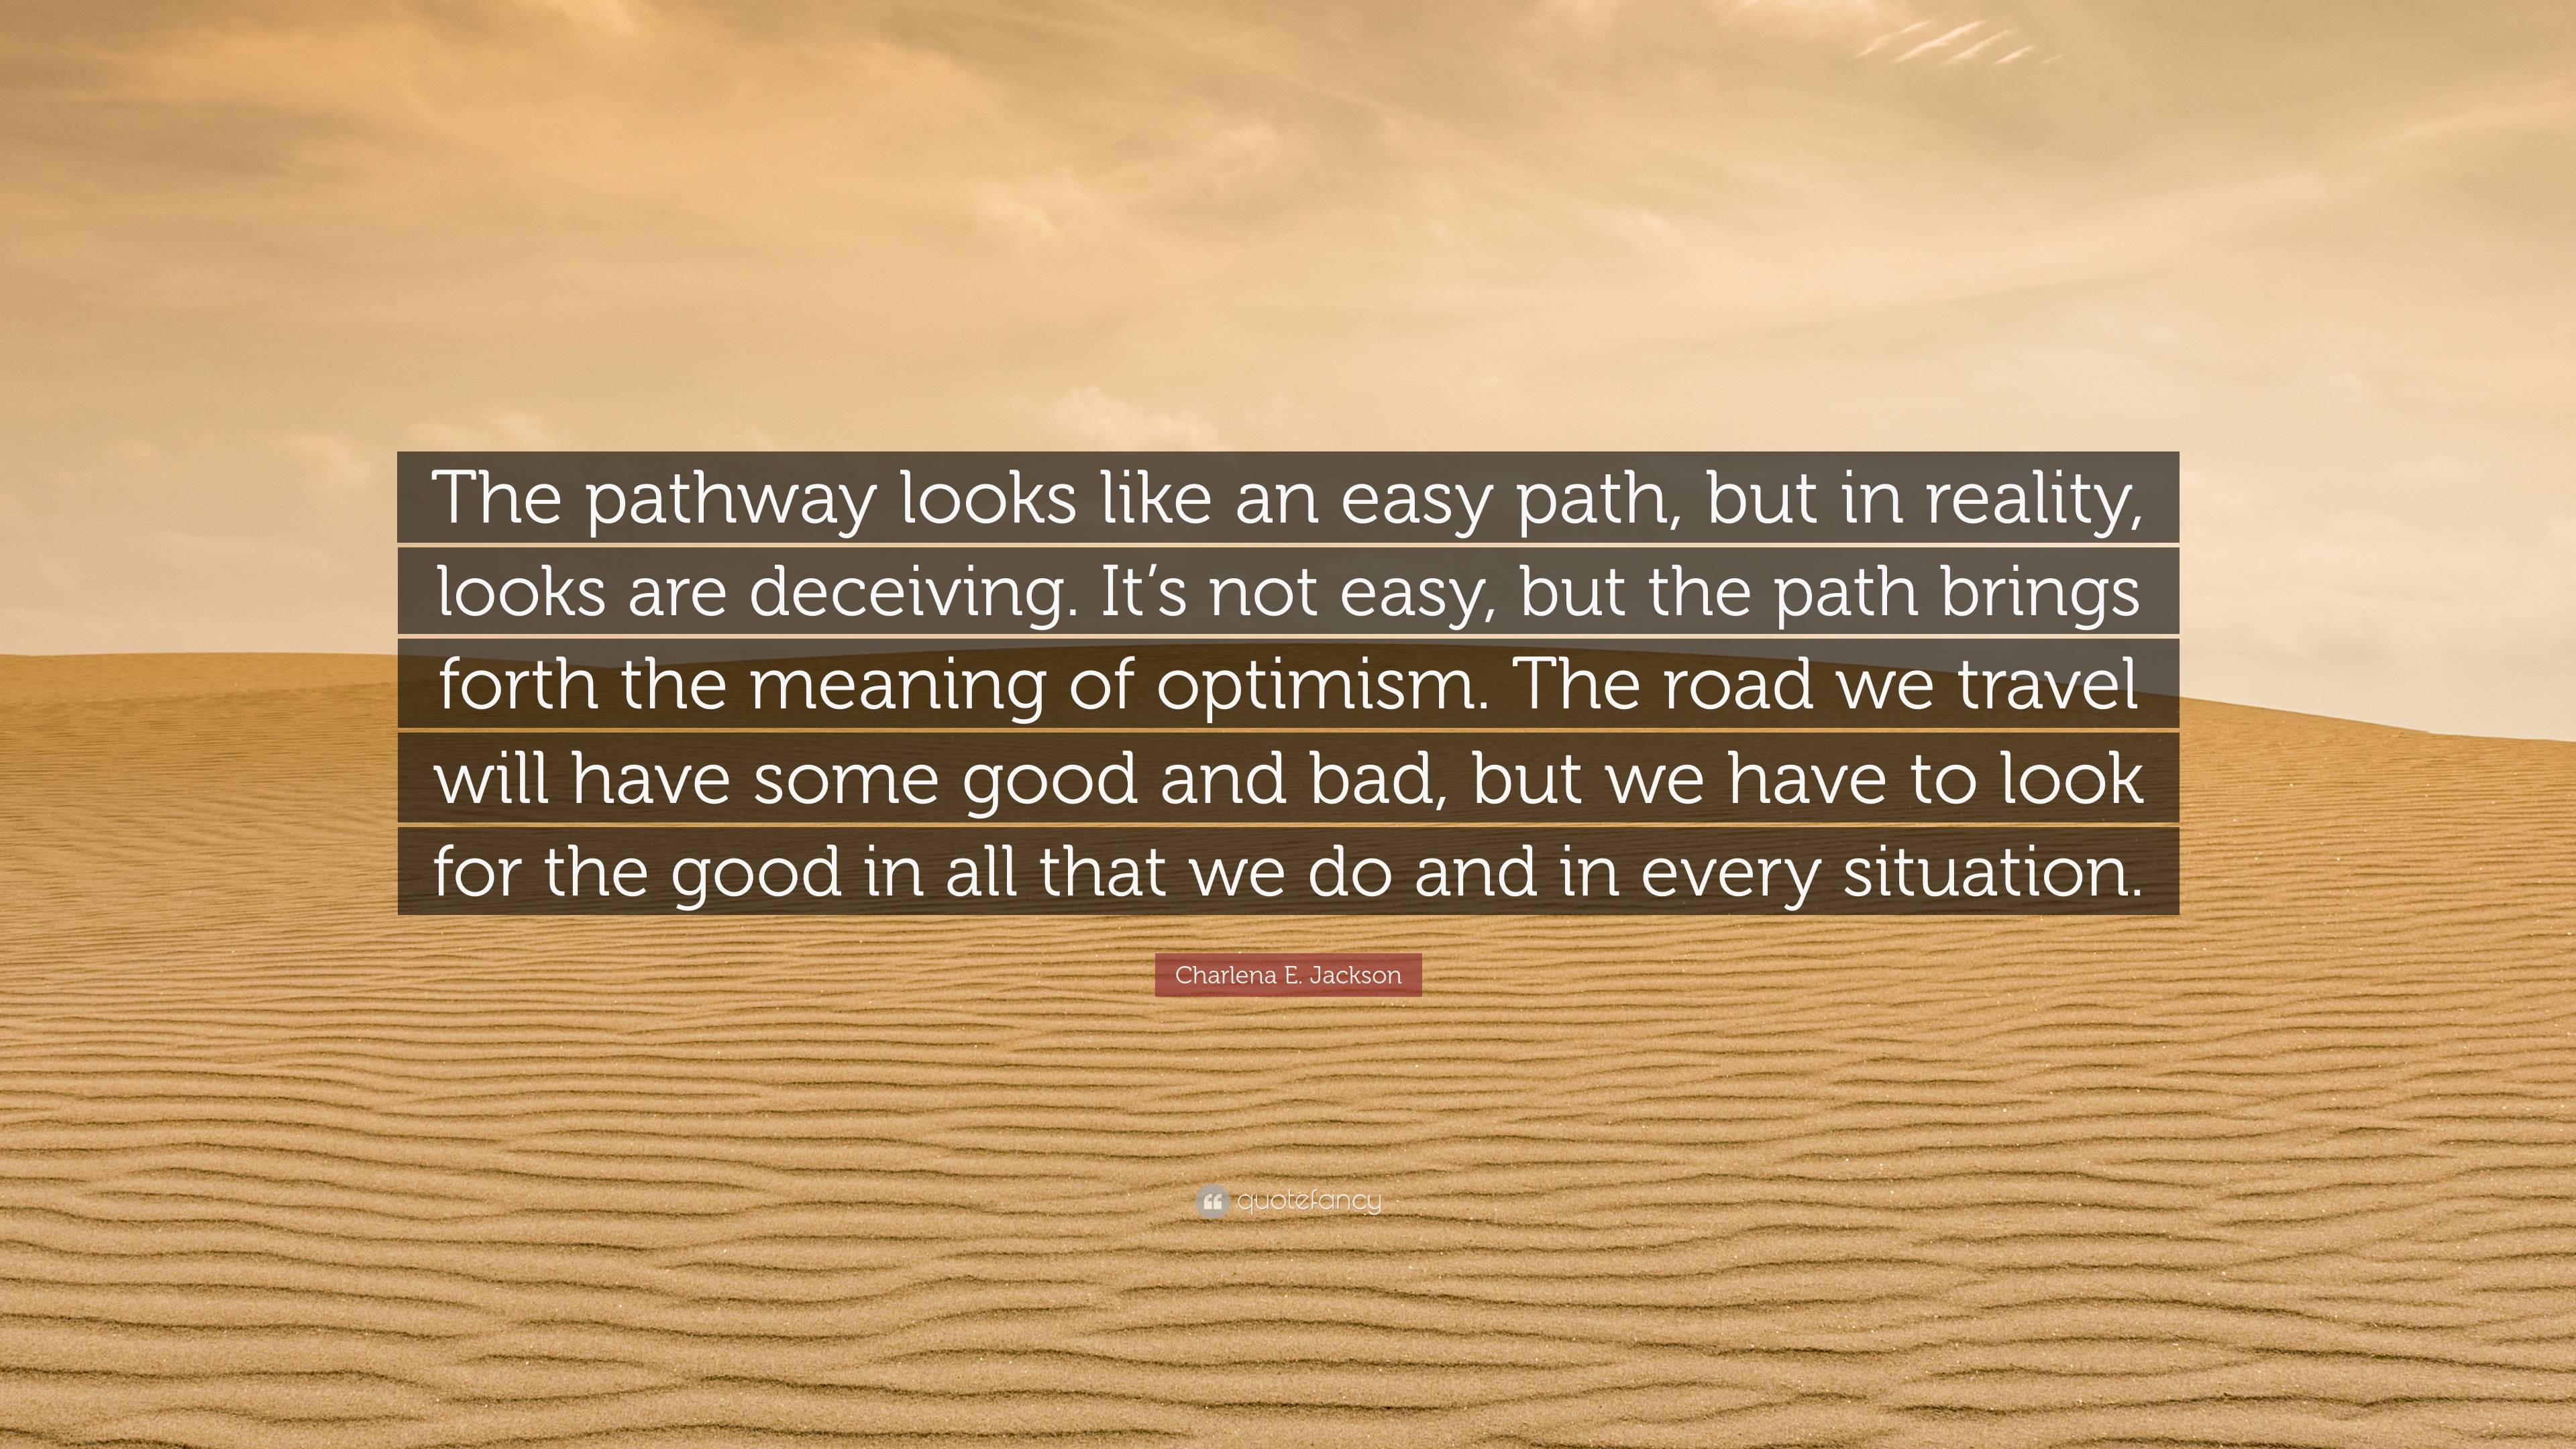 Charlena E. Jackson Quote: “The pathway looks like an easy path, but in  reality, looks are deceiving. It's not easy, but the path brings forth the  m”